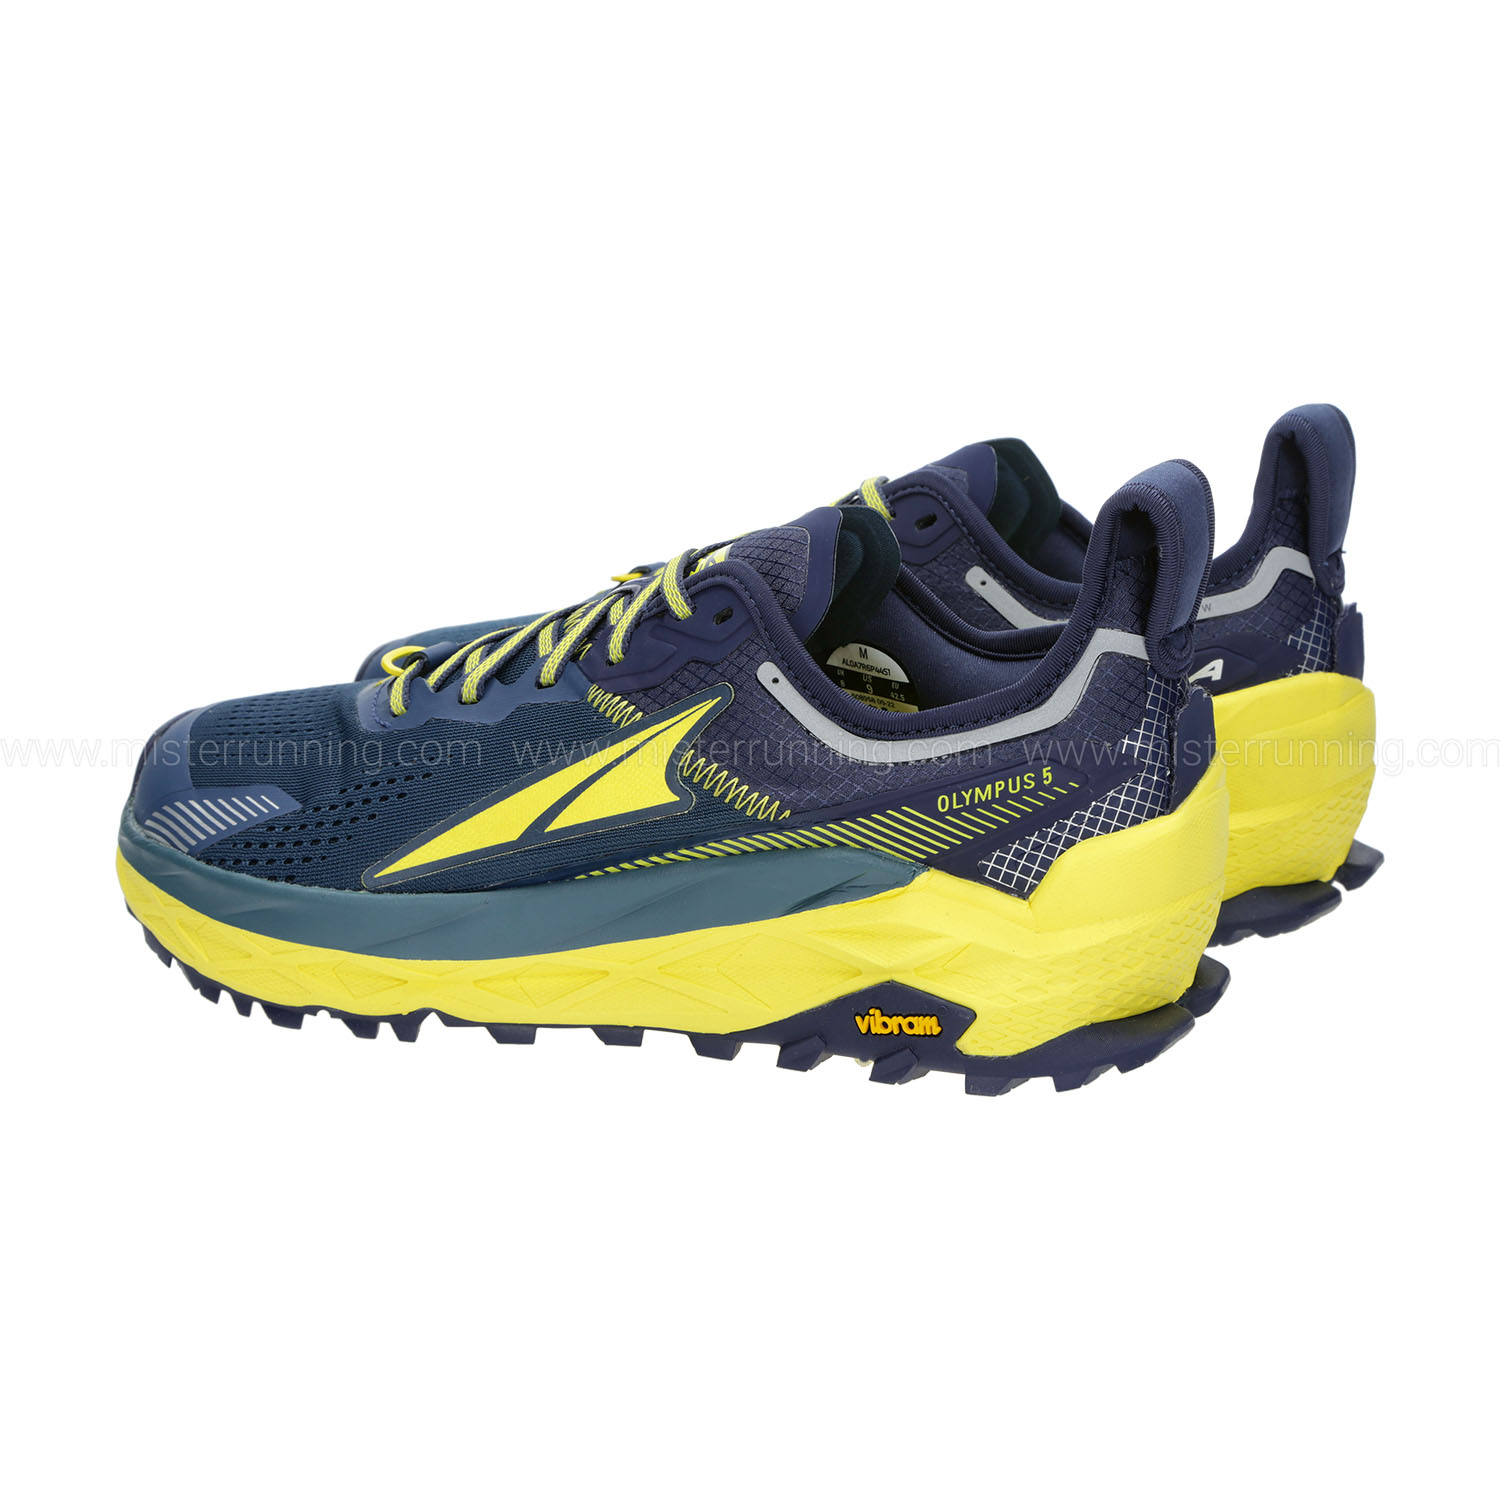 Altra Olympus 5 Men's Trail Running Shoes - Navy